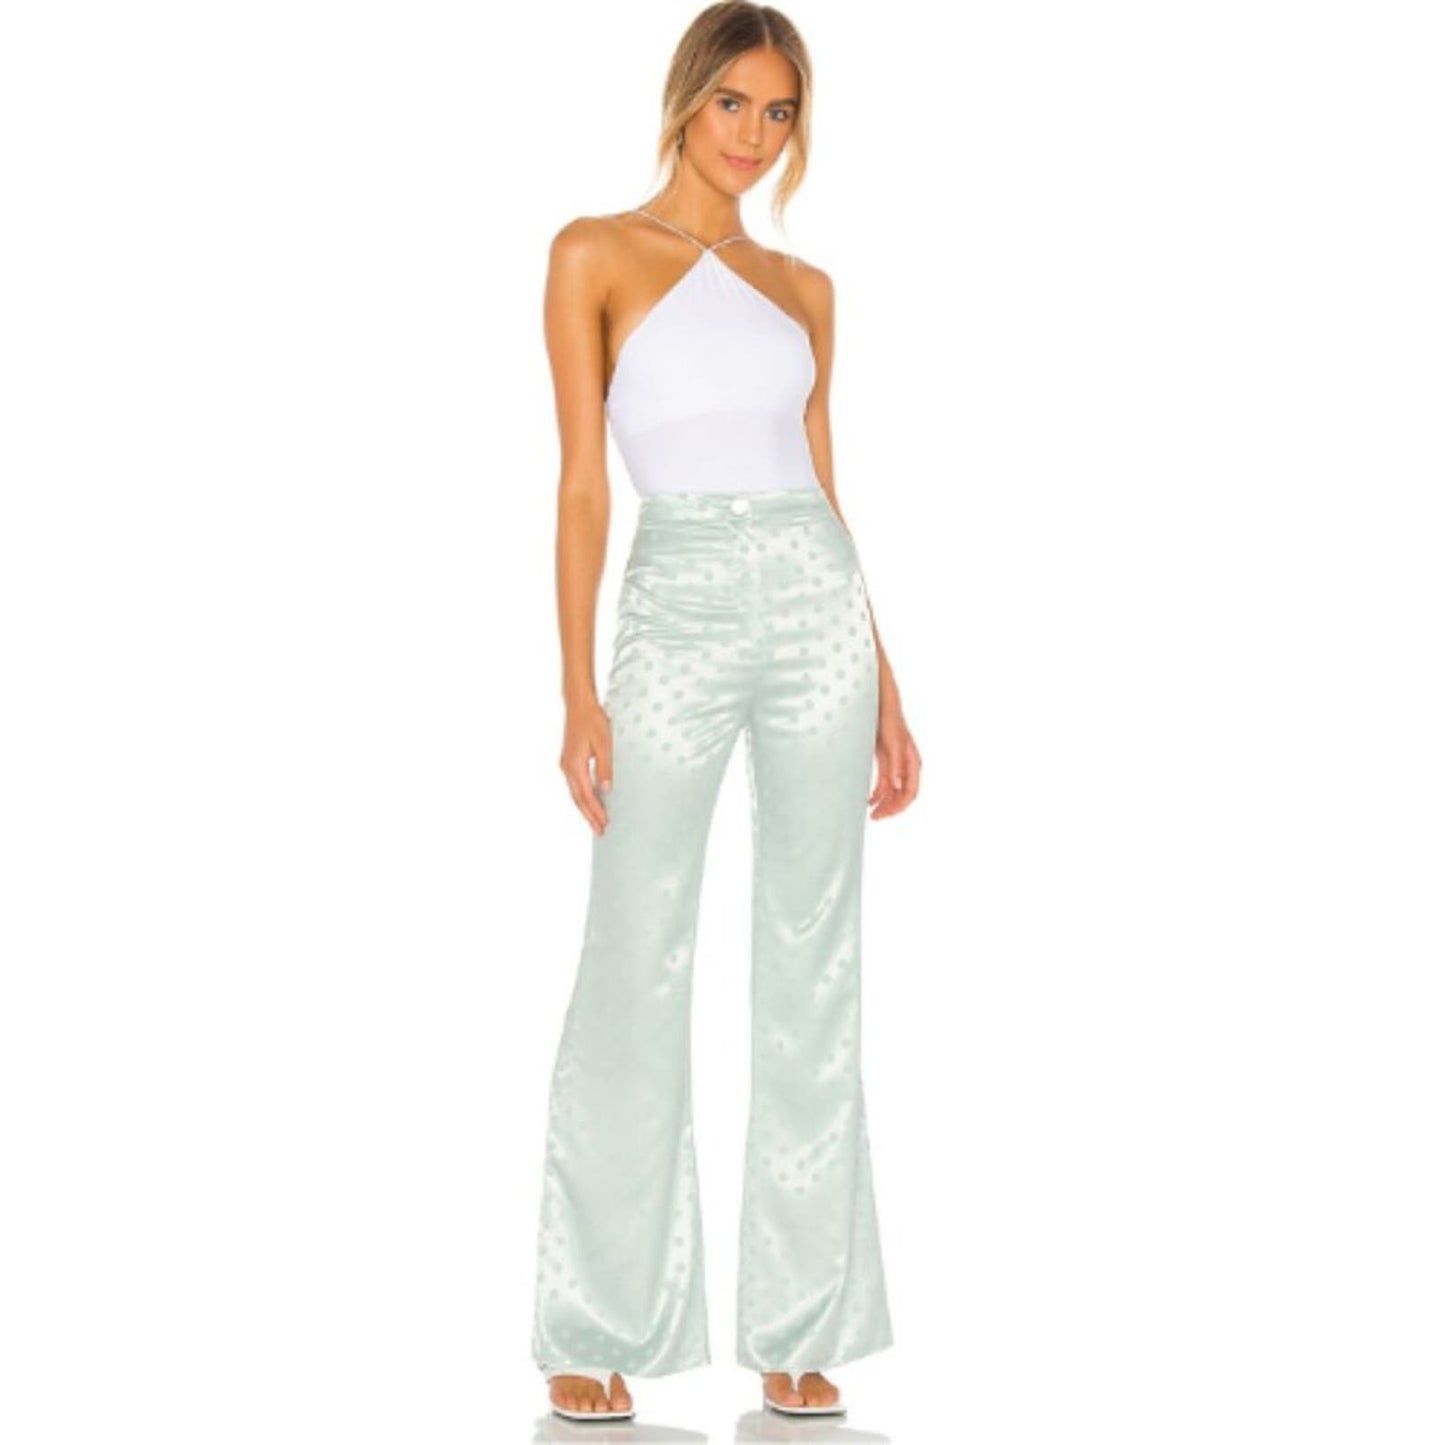 House of Harlow 1960 x REVOLVE Ansley Pant in Mint NWT Size XS